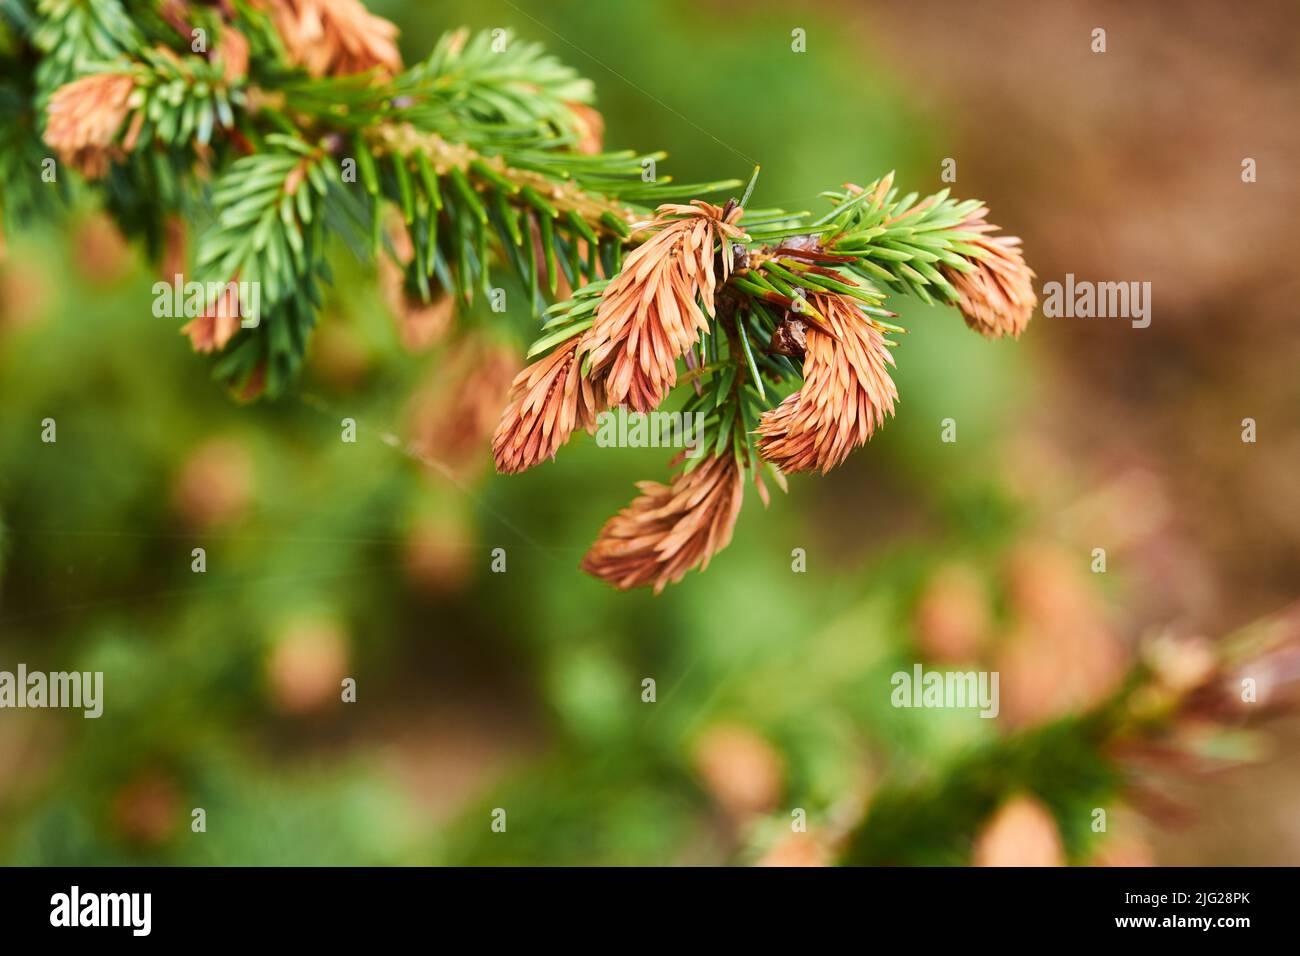 Closeup of Sitka spruce growing in a quiet, zen pine forest with a blurry background and copyspace. Zoom in on details and patterns of pine needles on Stock Photo